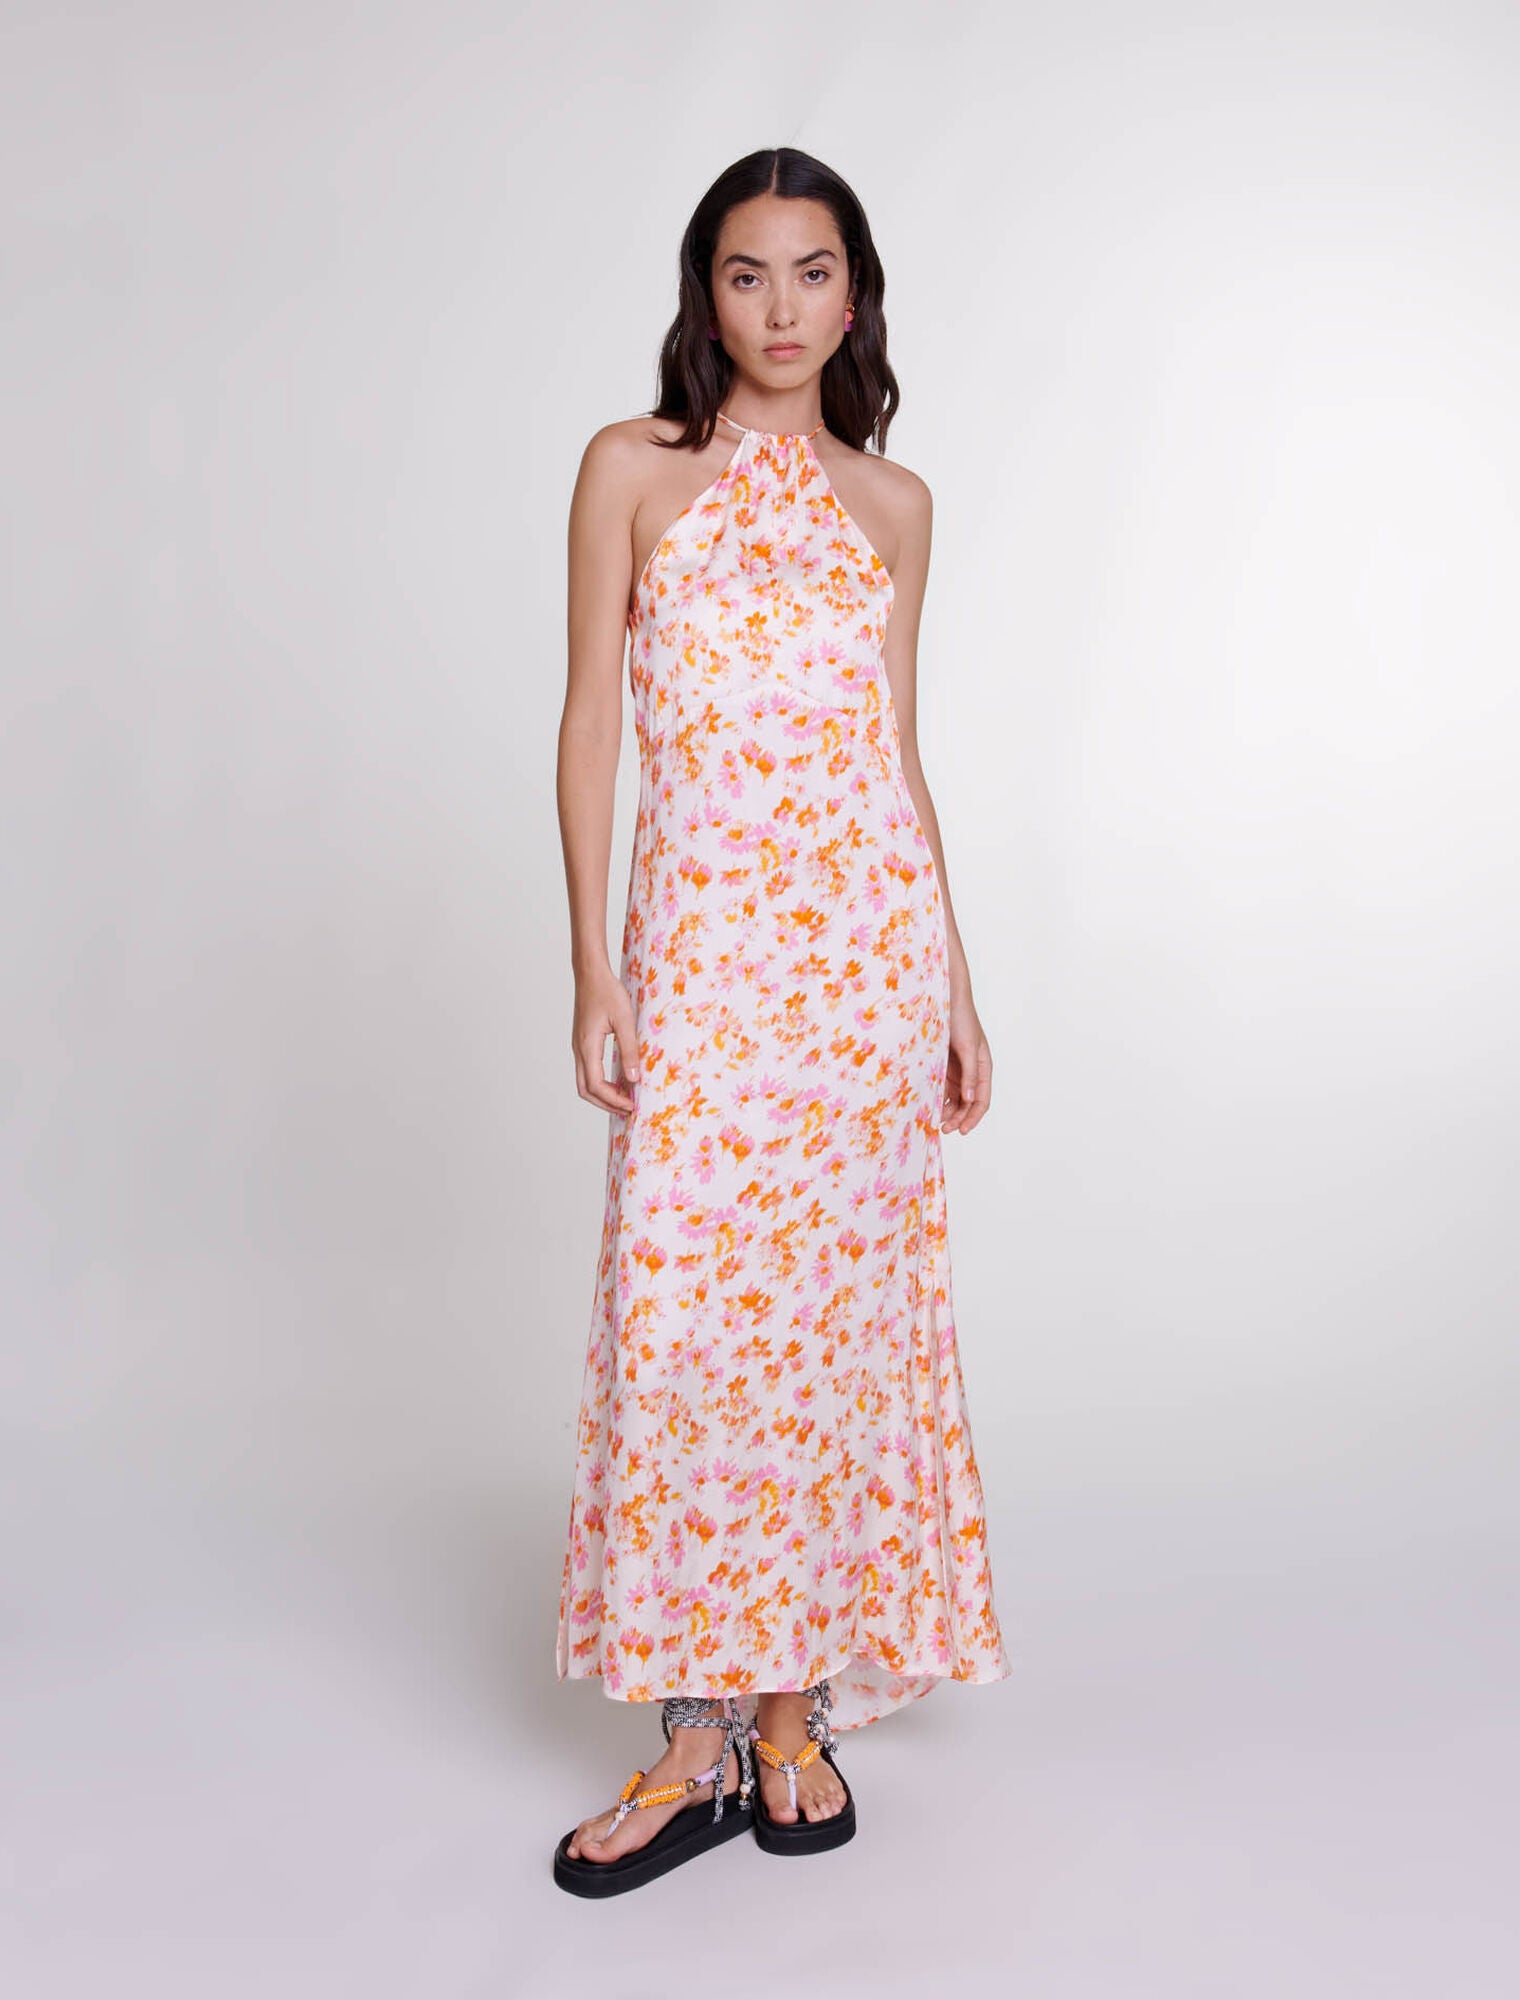 Sping Orange Flower Print-featured-Floral satin-effect maxi dress